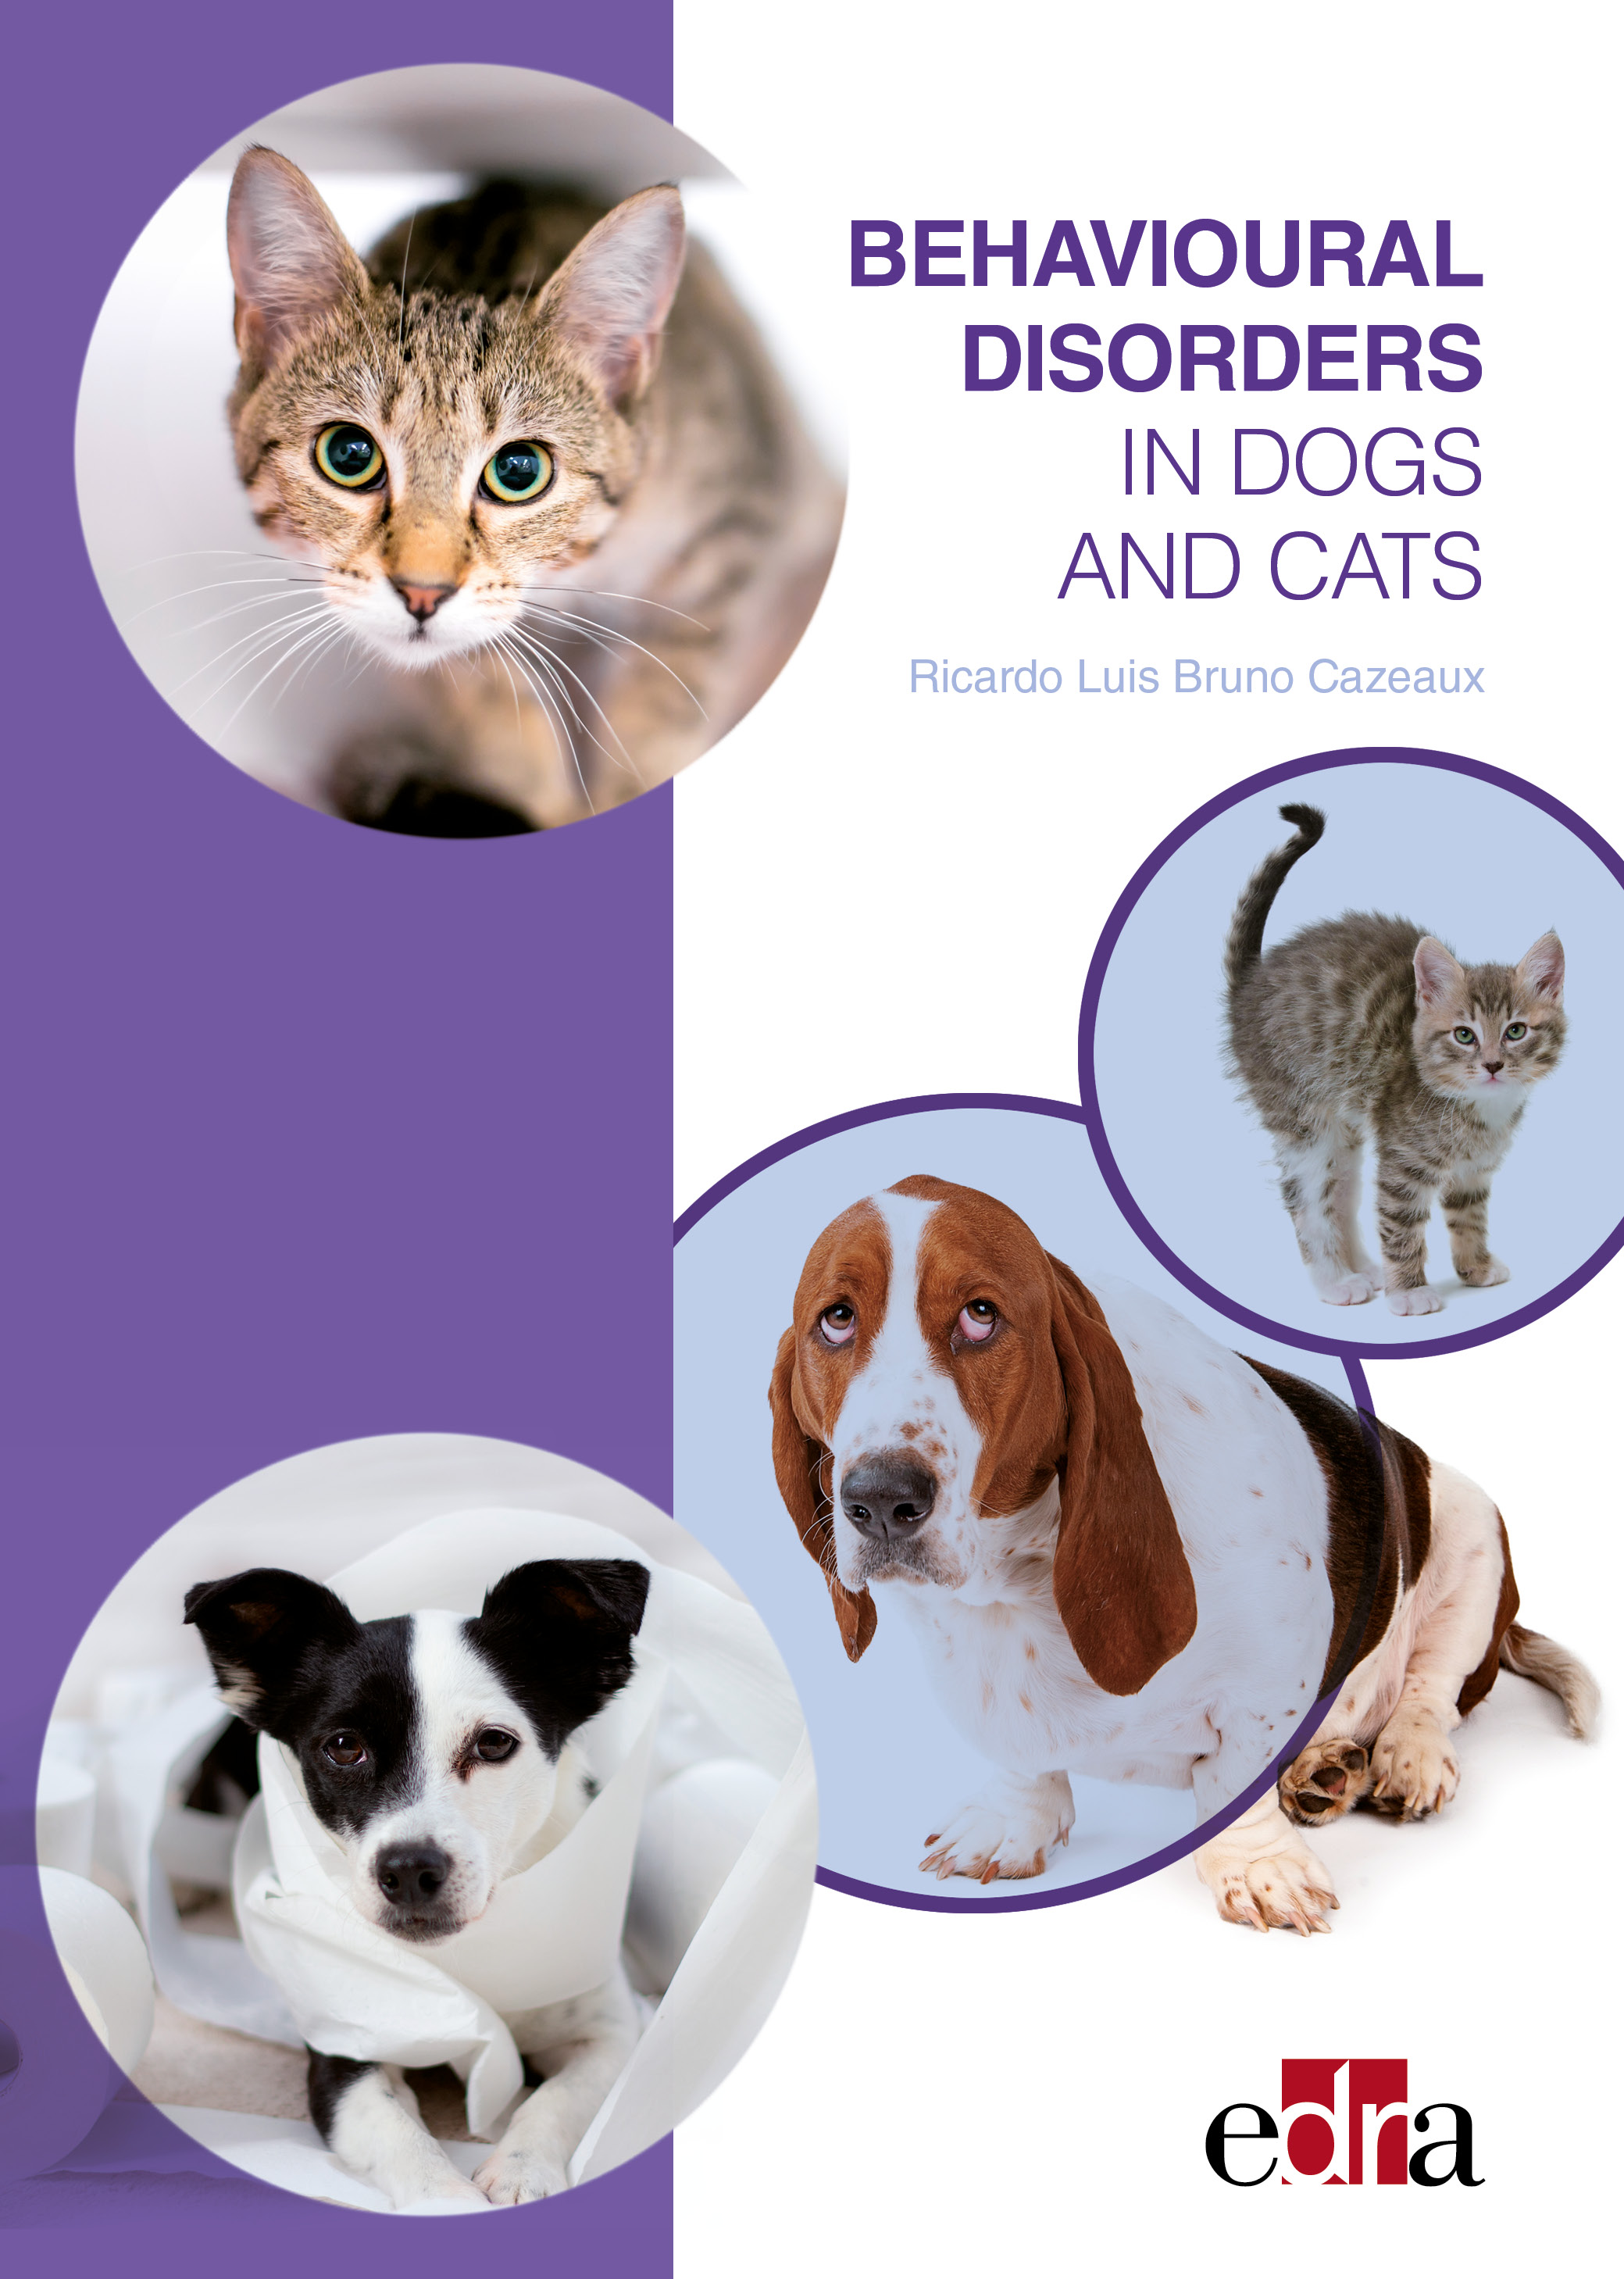 Behavioural Disorders in Dogs and Cats (9788418498787)